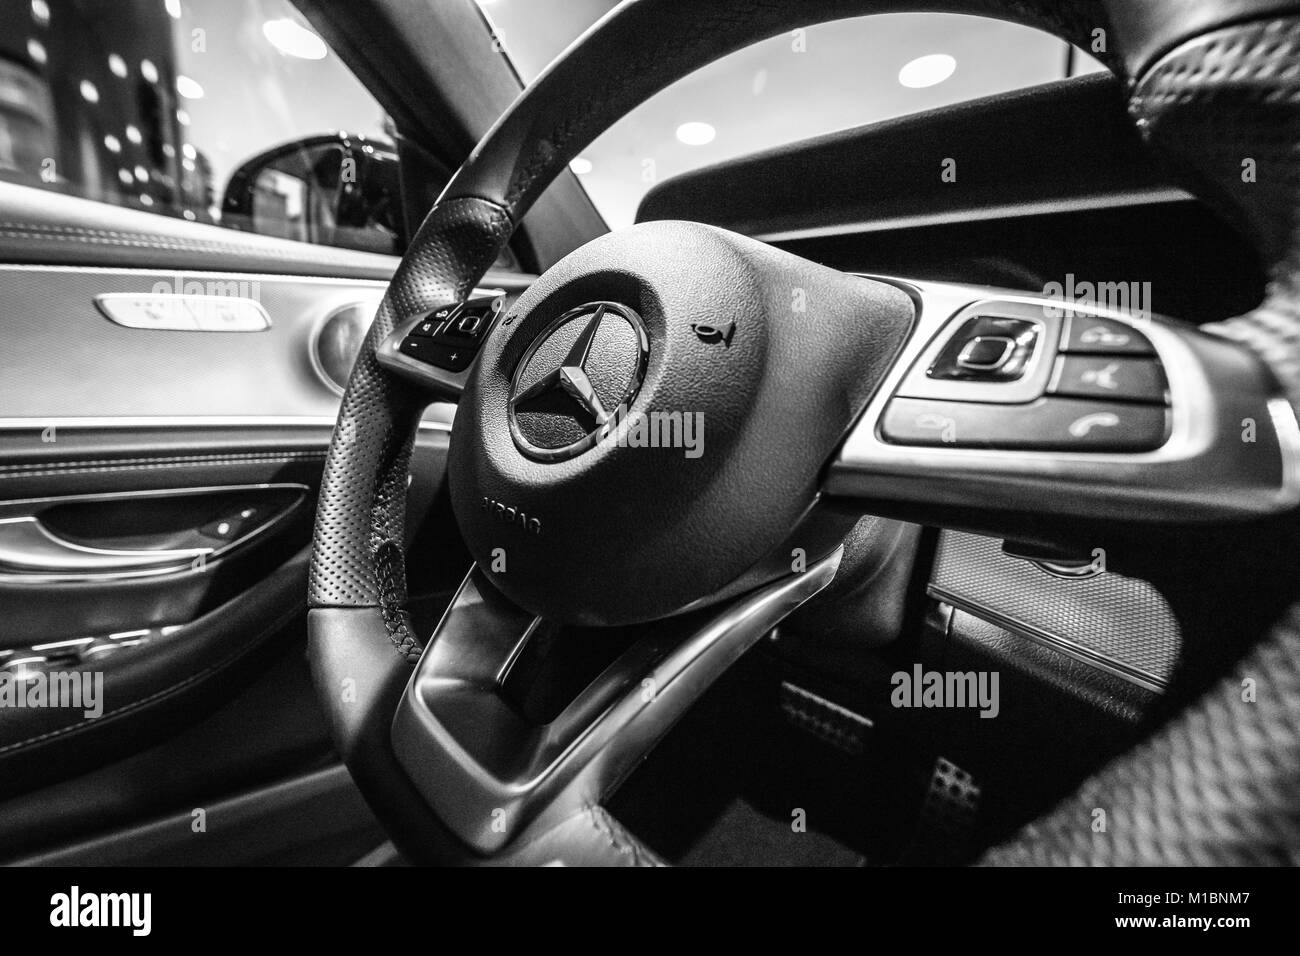 BERLIN - DECEMBER 21, 2017: Showroom. Cabin of the executive car Mercedes-Benz E-Class E220d (W213). Close-up. Black and white. Since 2017. Stock Photo